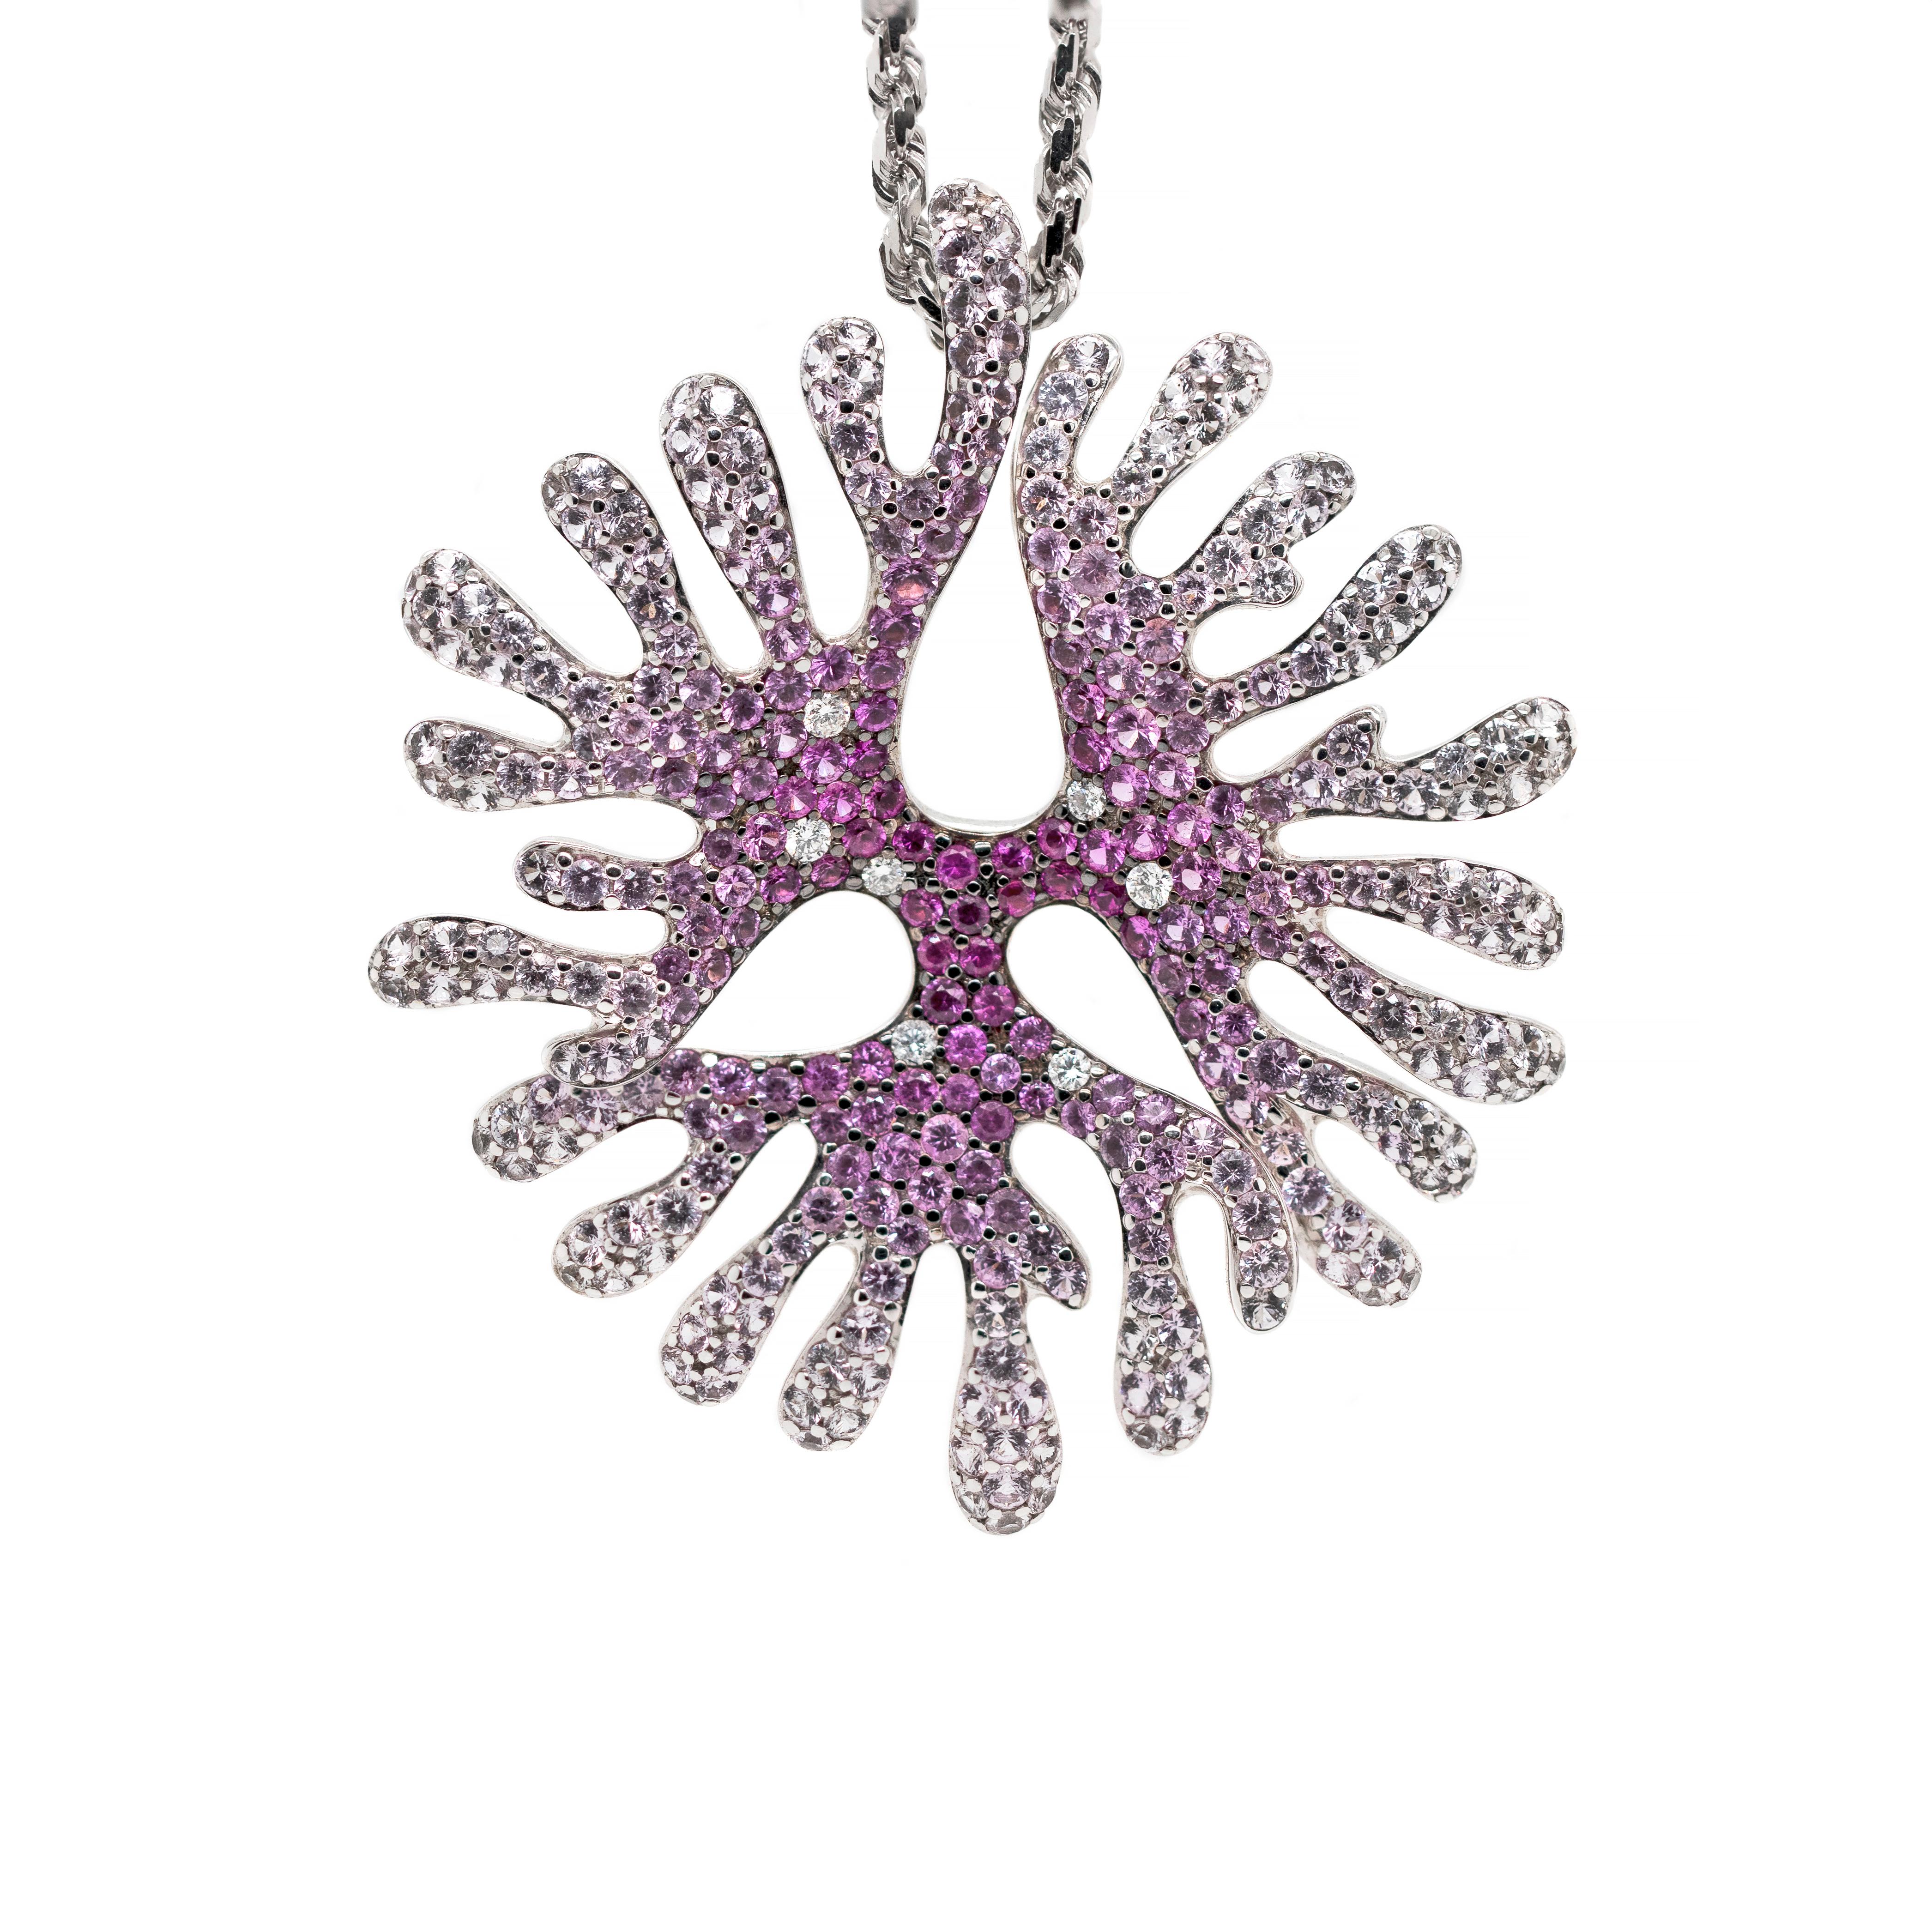 This incredible coral shaped pendant is set with a mix of beautiful pink and white sapphires weighing a total approximate weight of 5.00ct, all mounted in 18ct white gold. To accompany the beautiful sapphires, the pendant is further set with 7 round